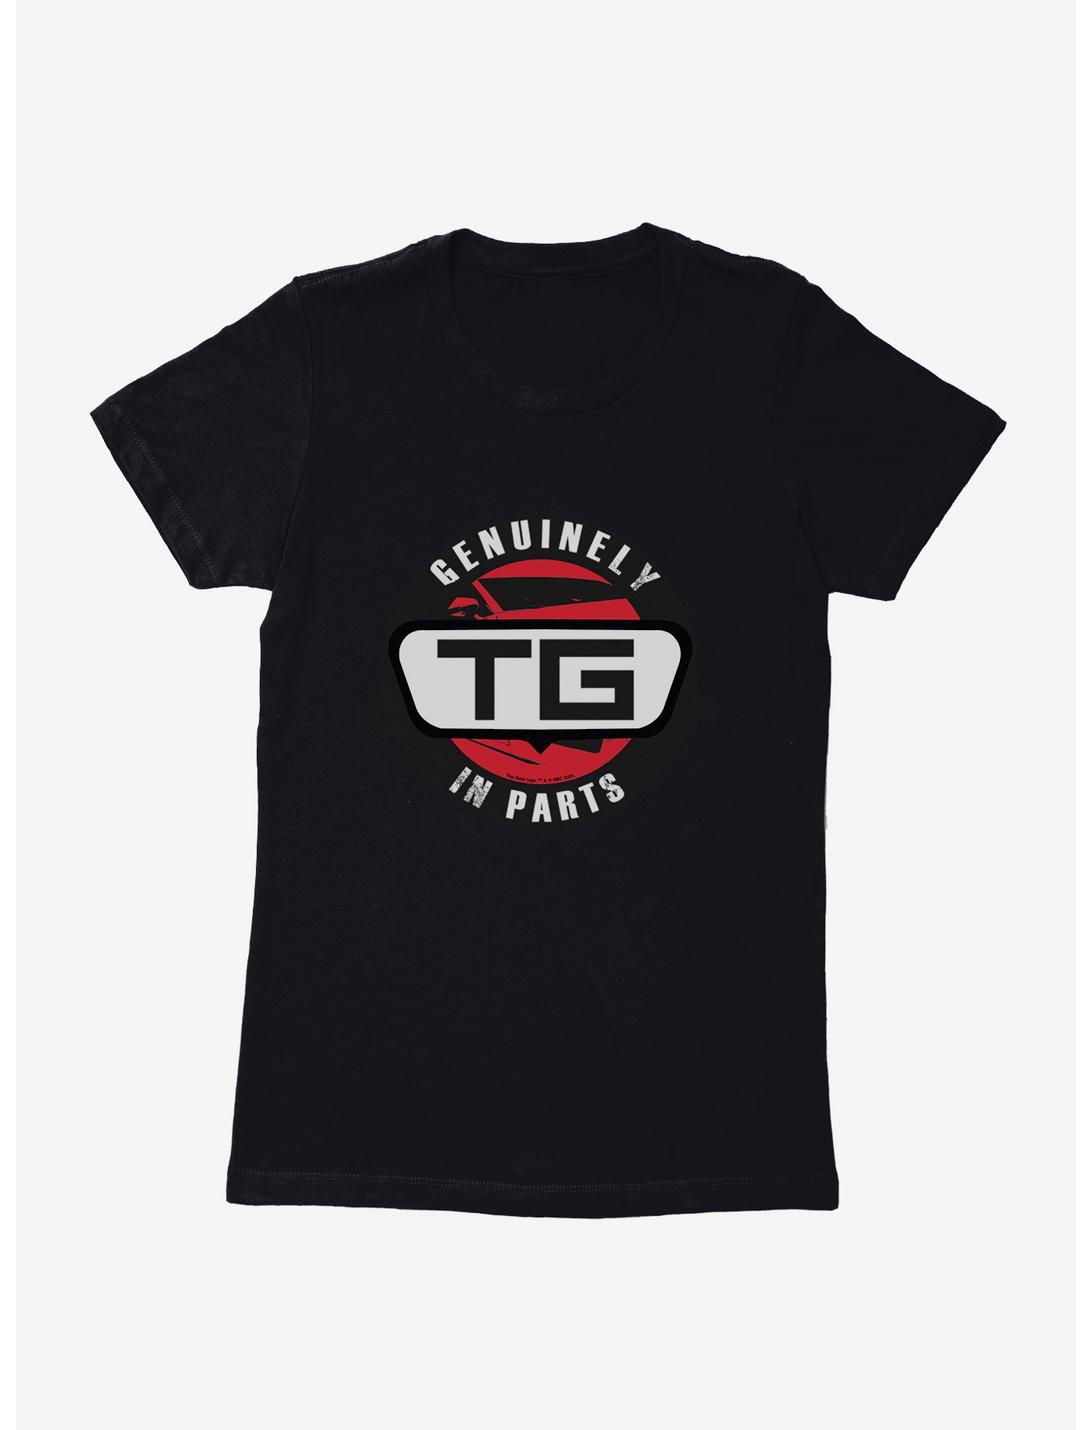 Top Gear Genuinely In Parts Womens T-Shirt, , hi-res